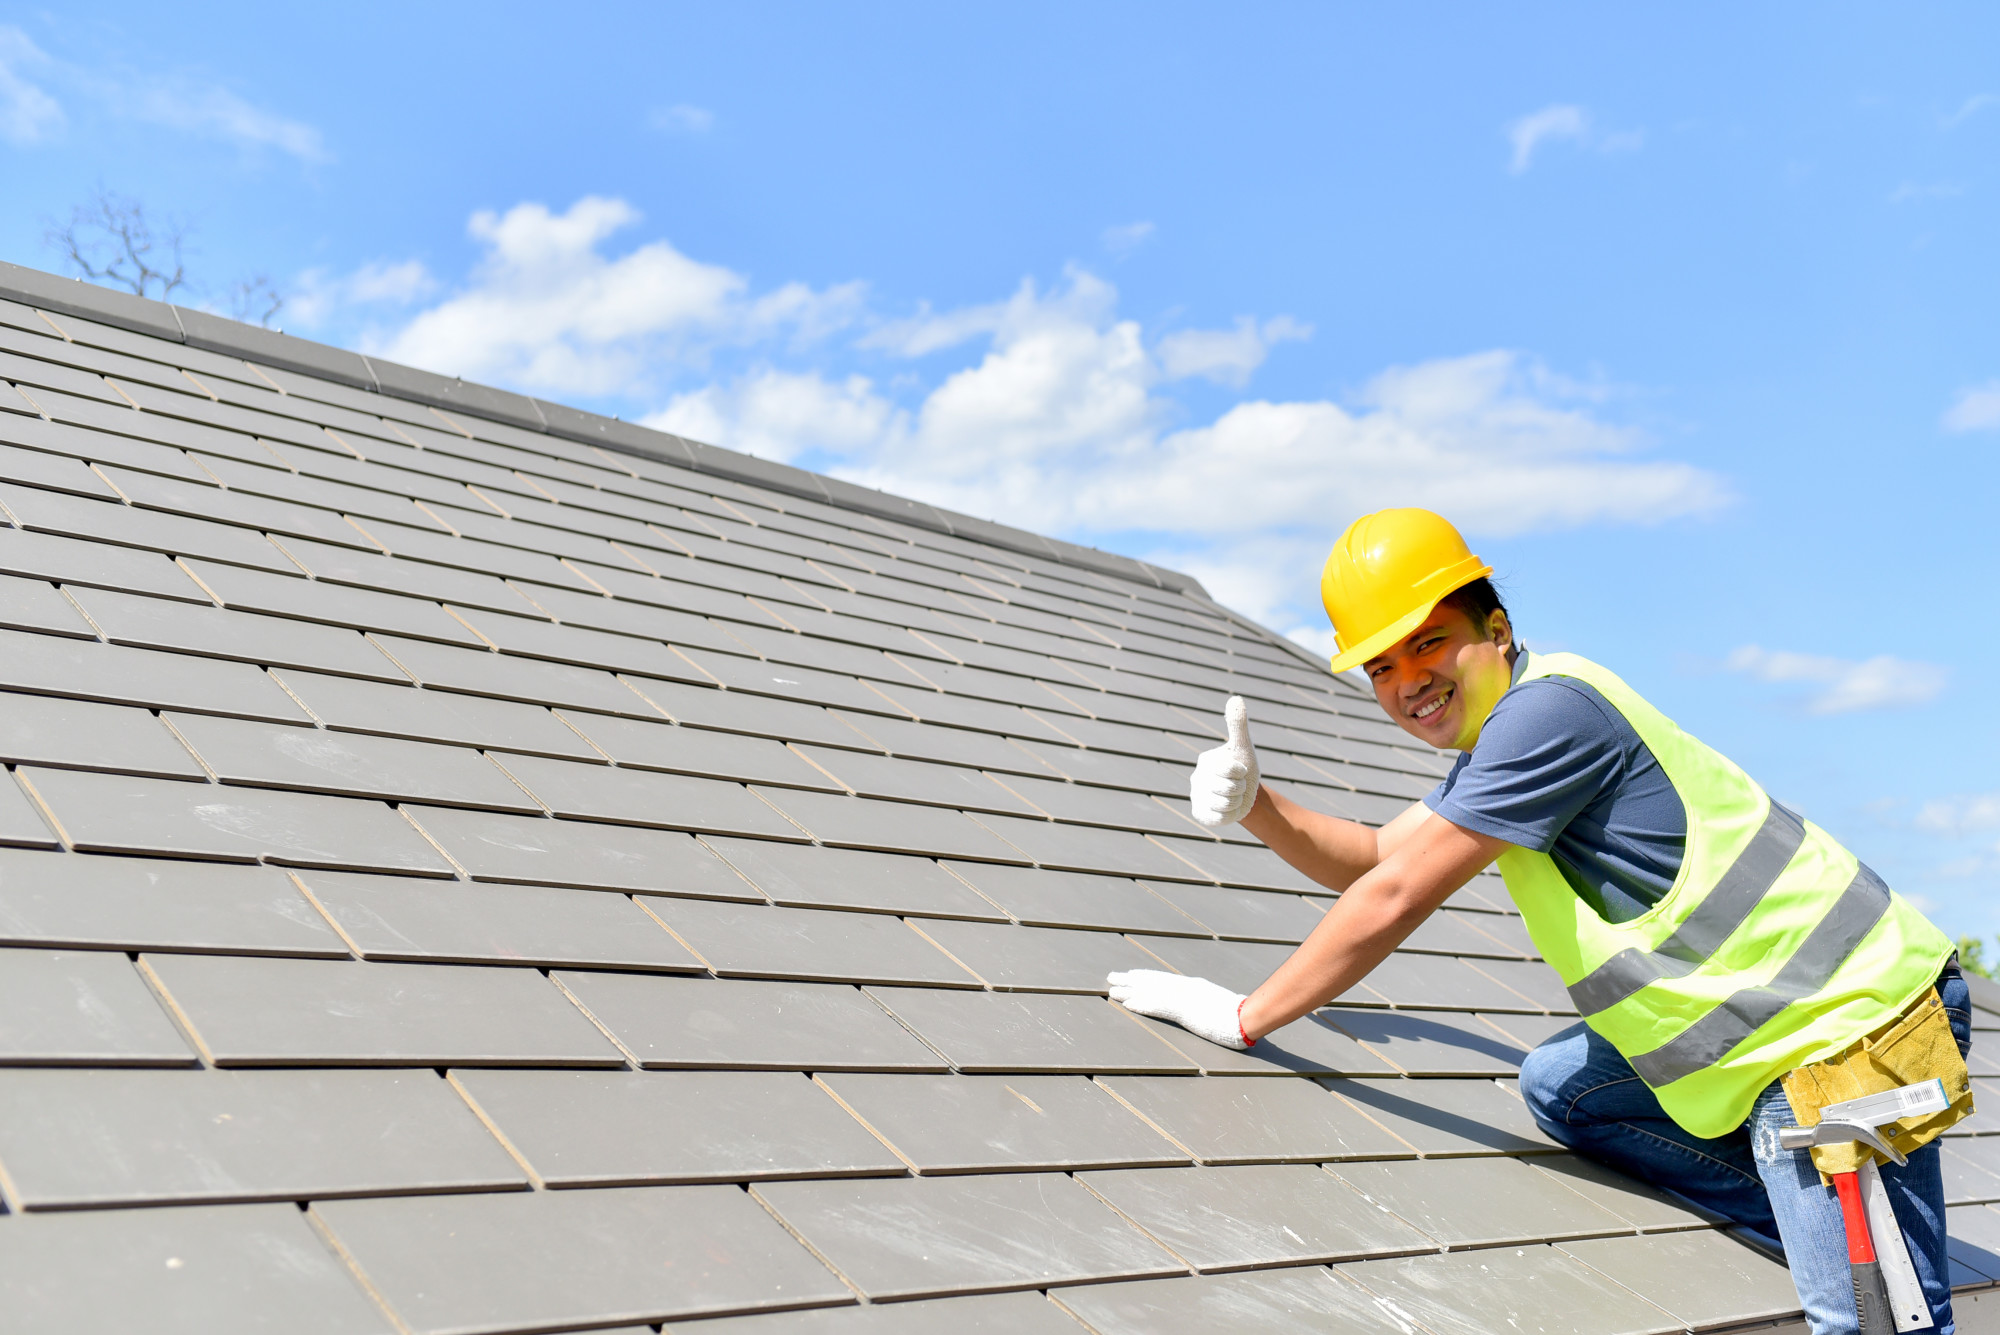 Are you wondering how to hire a reliable roofing contractor? Click here for five important questions you should ask your potential roofing contractor.